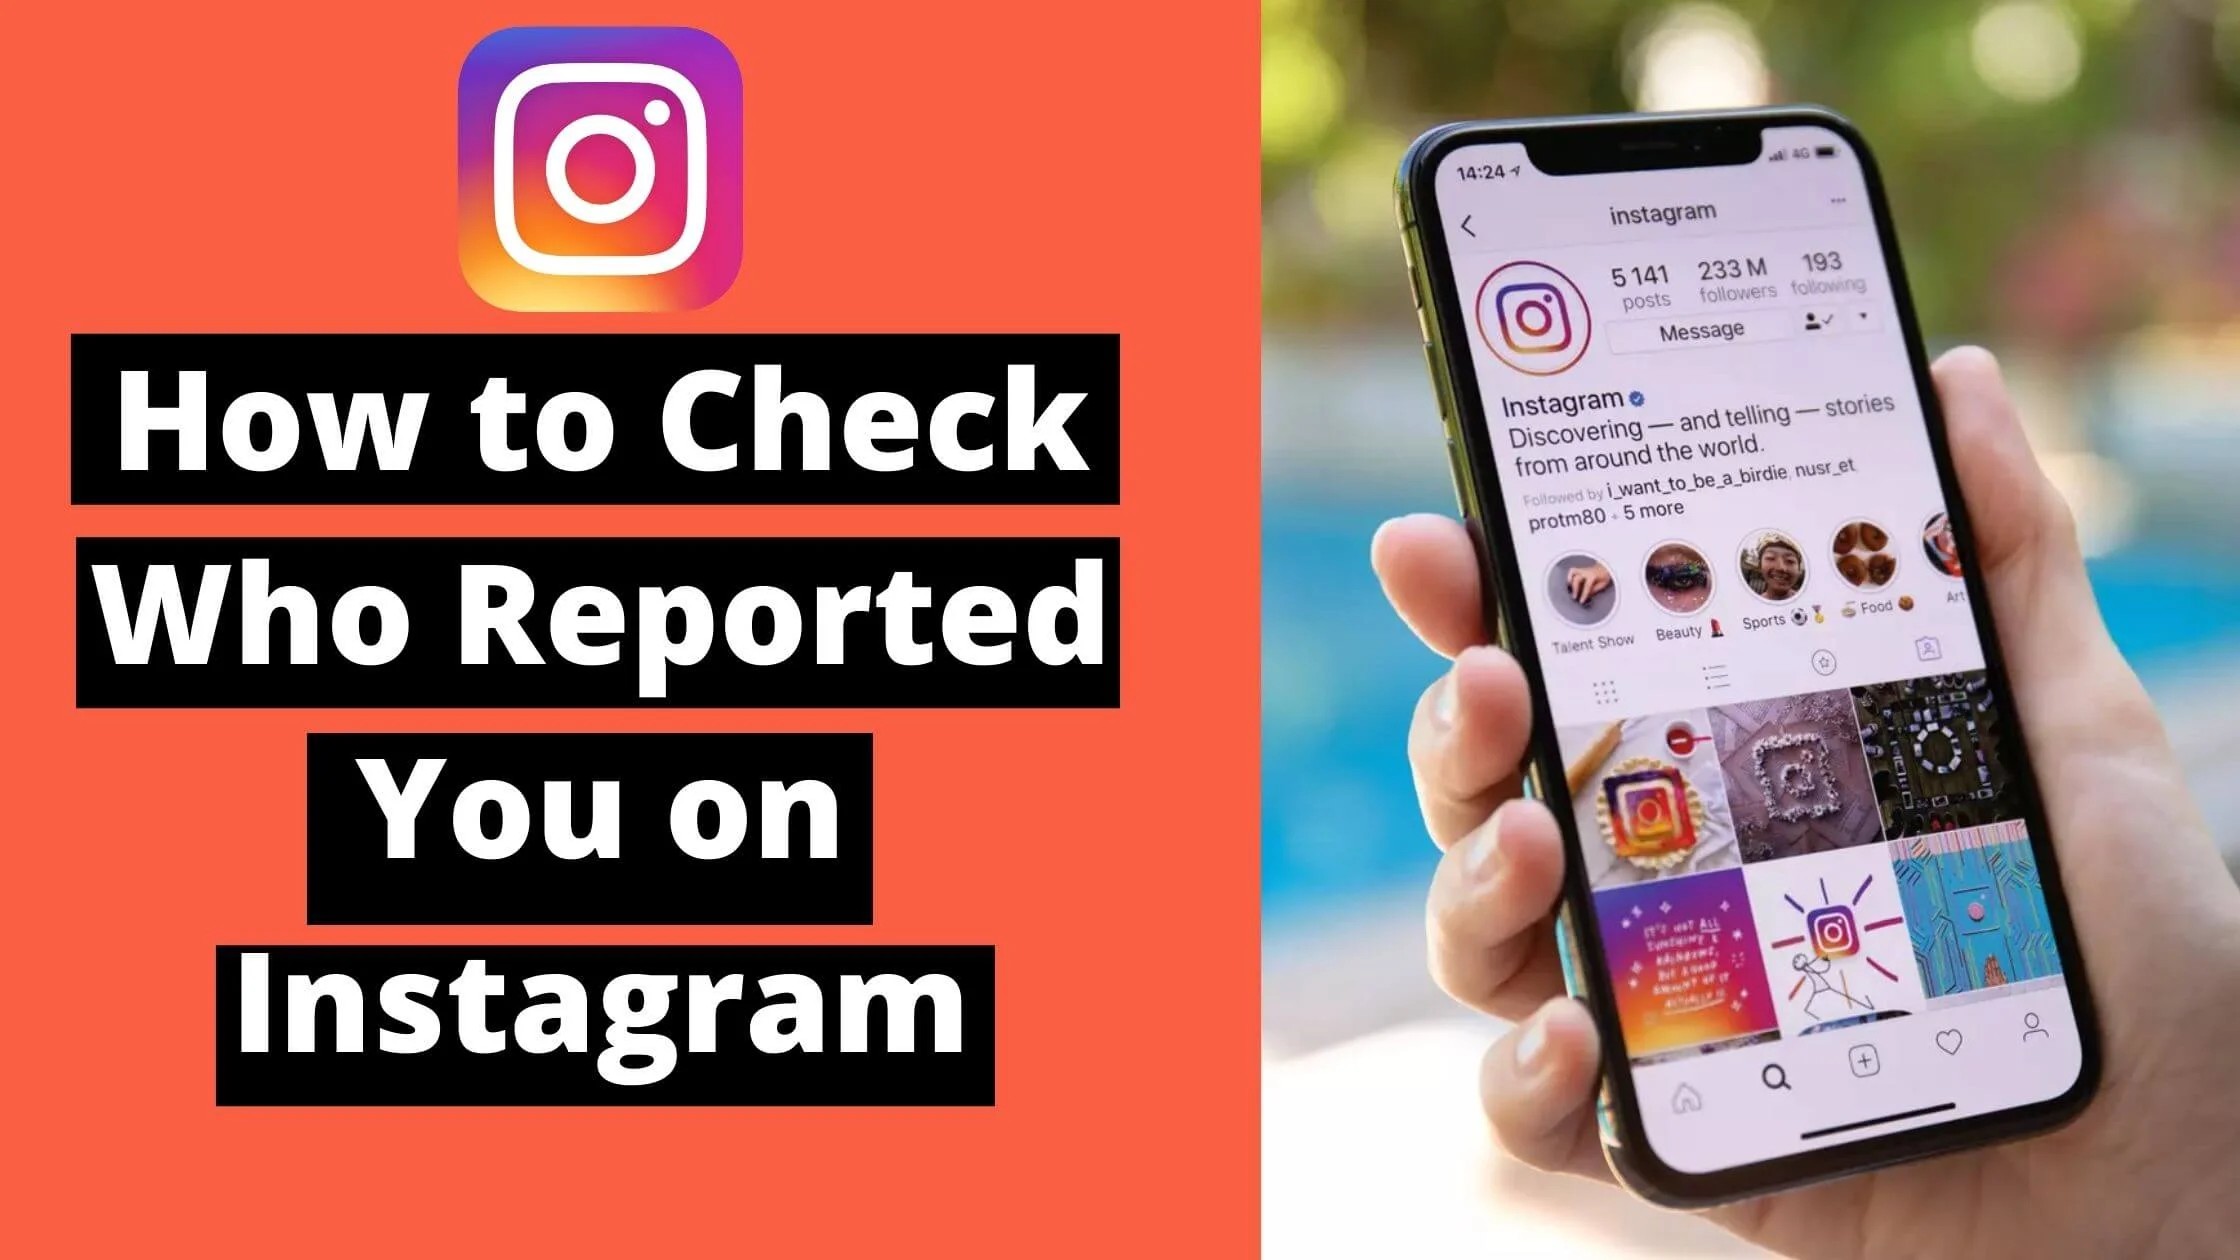 How to Check Who Reported You on Instagram